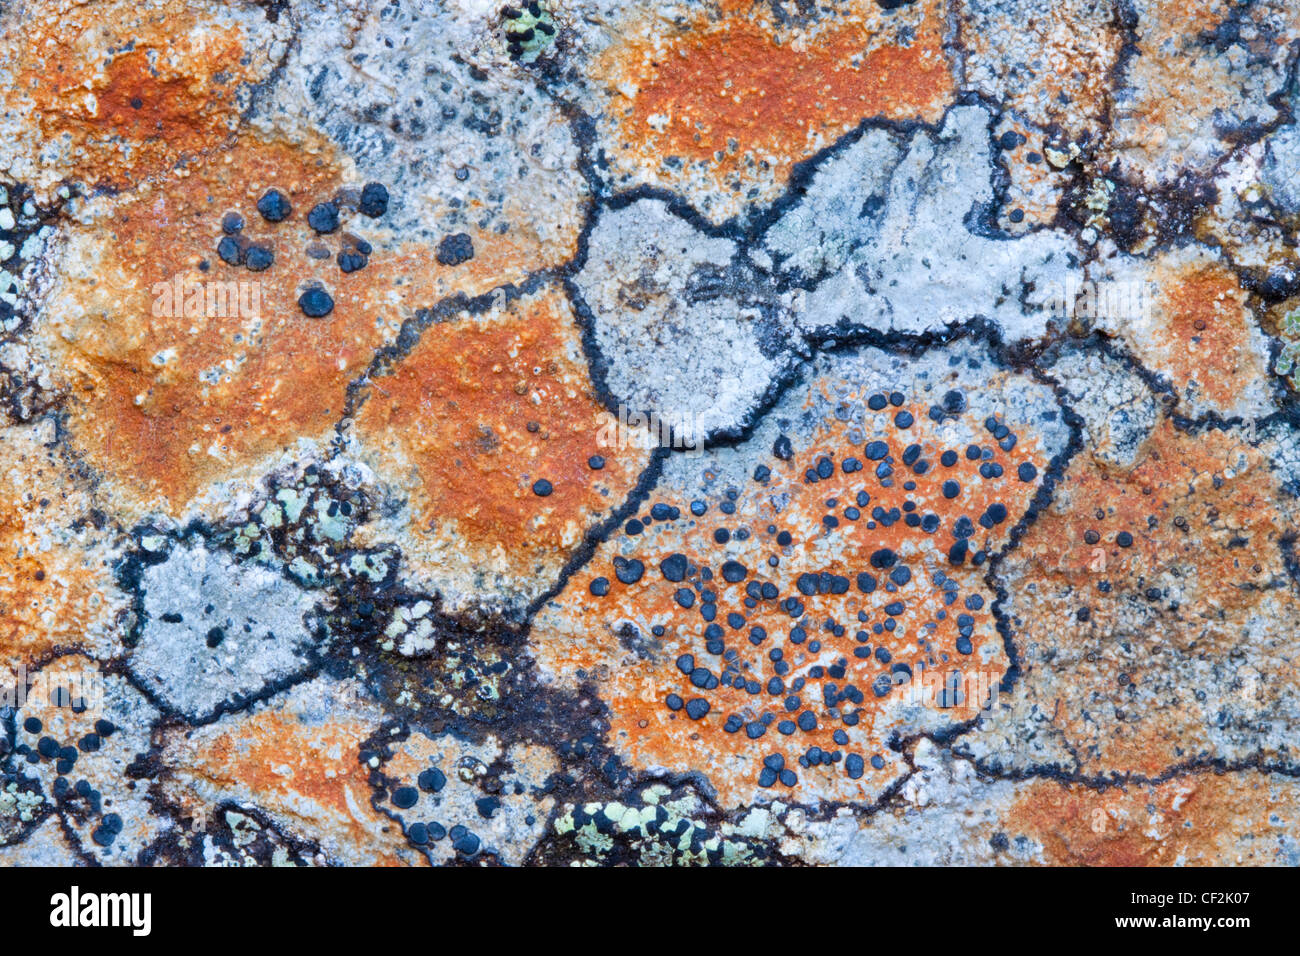 Natural patterns of Lichen and Algae on a rock in the Cairngorms. Stock Photo